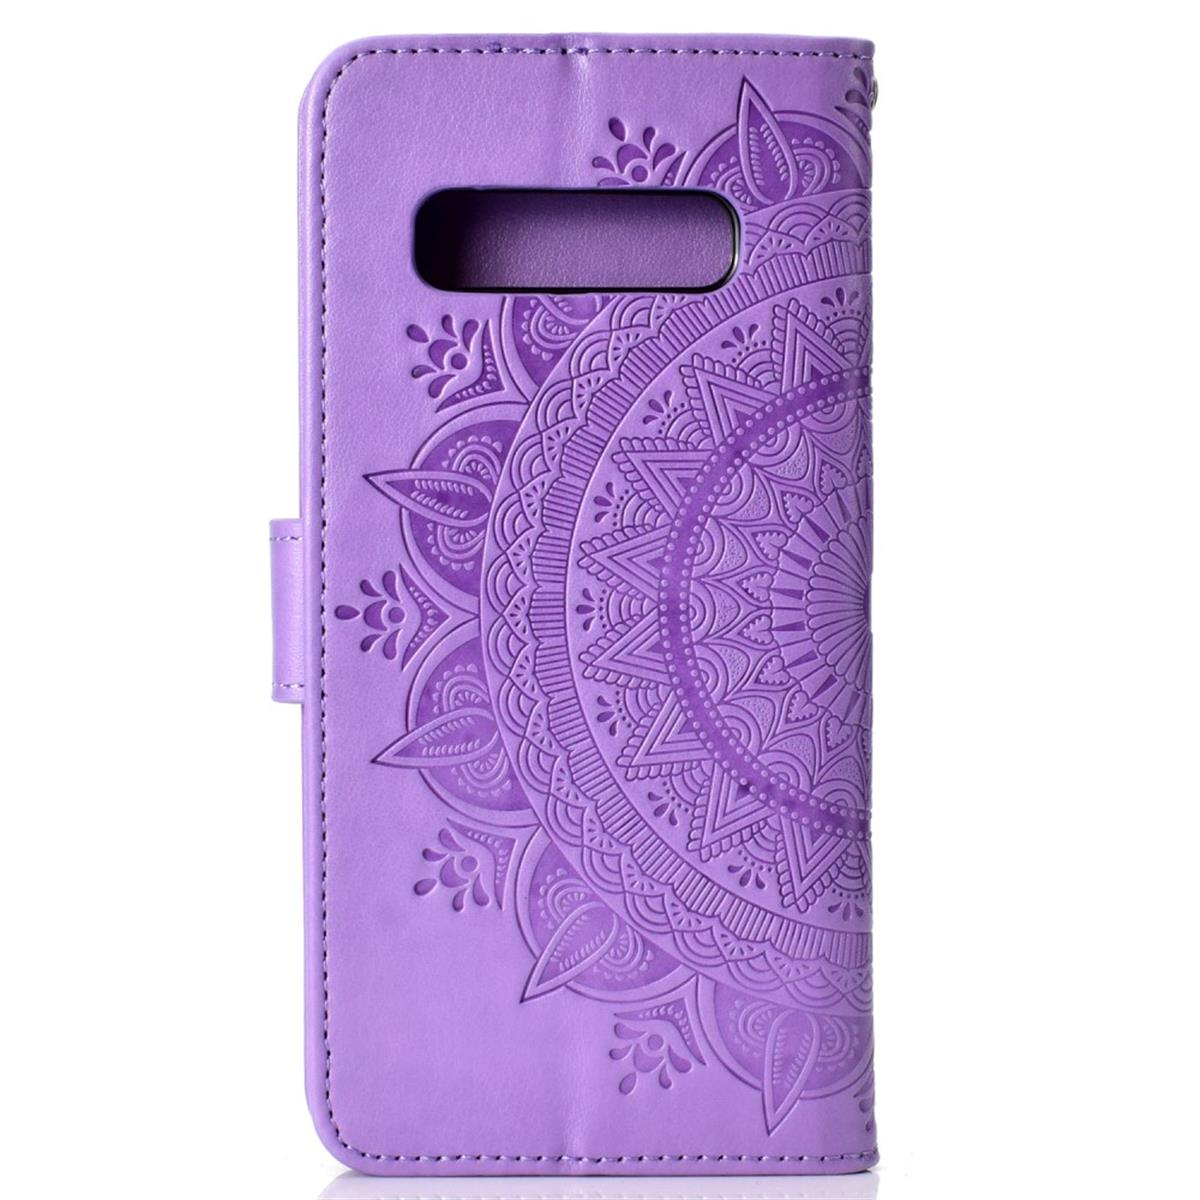 COVERKINGZ Klapphülle Muster, Mandala mit Lila S10, Bookcover, Galaxy Samsung